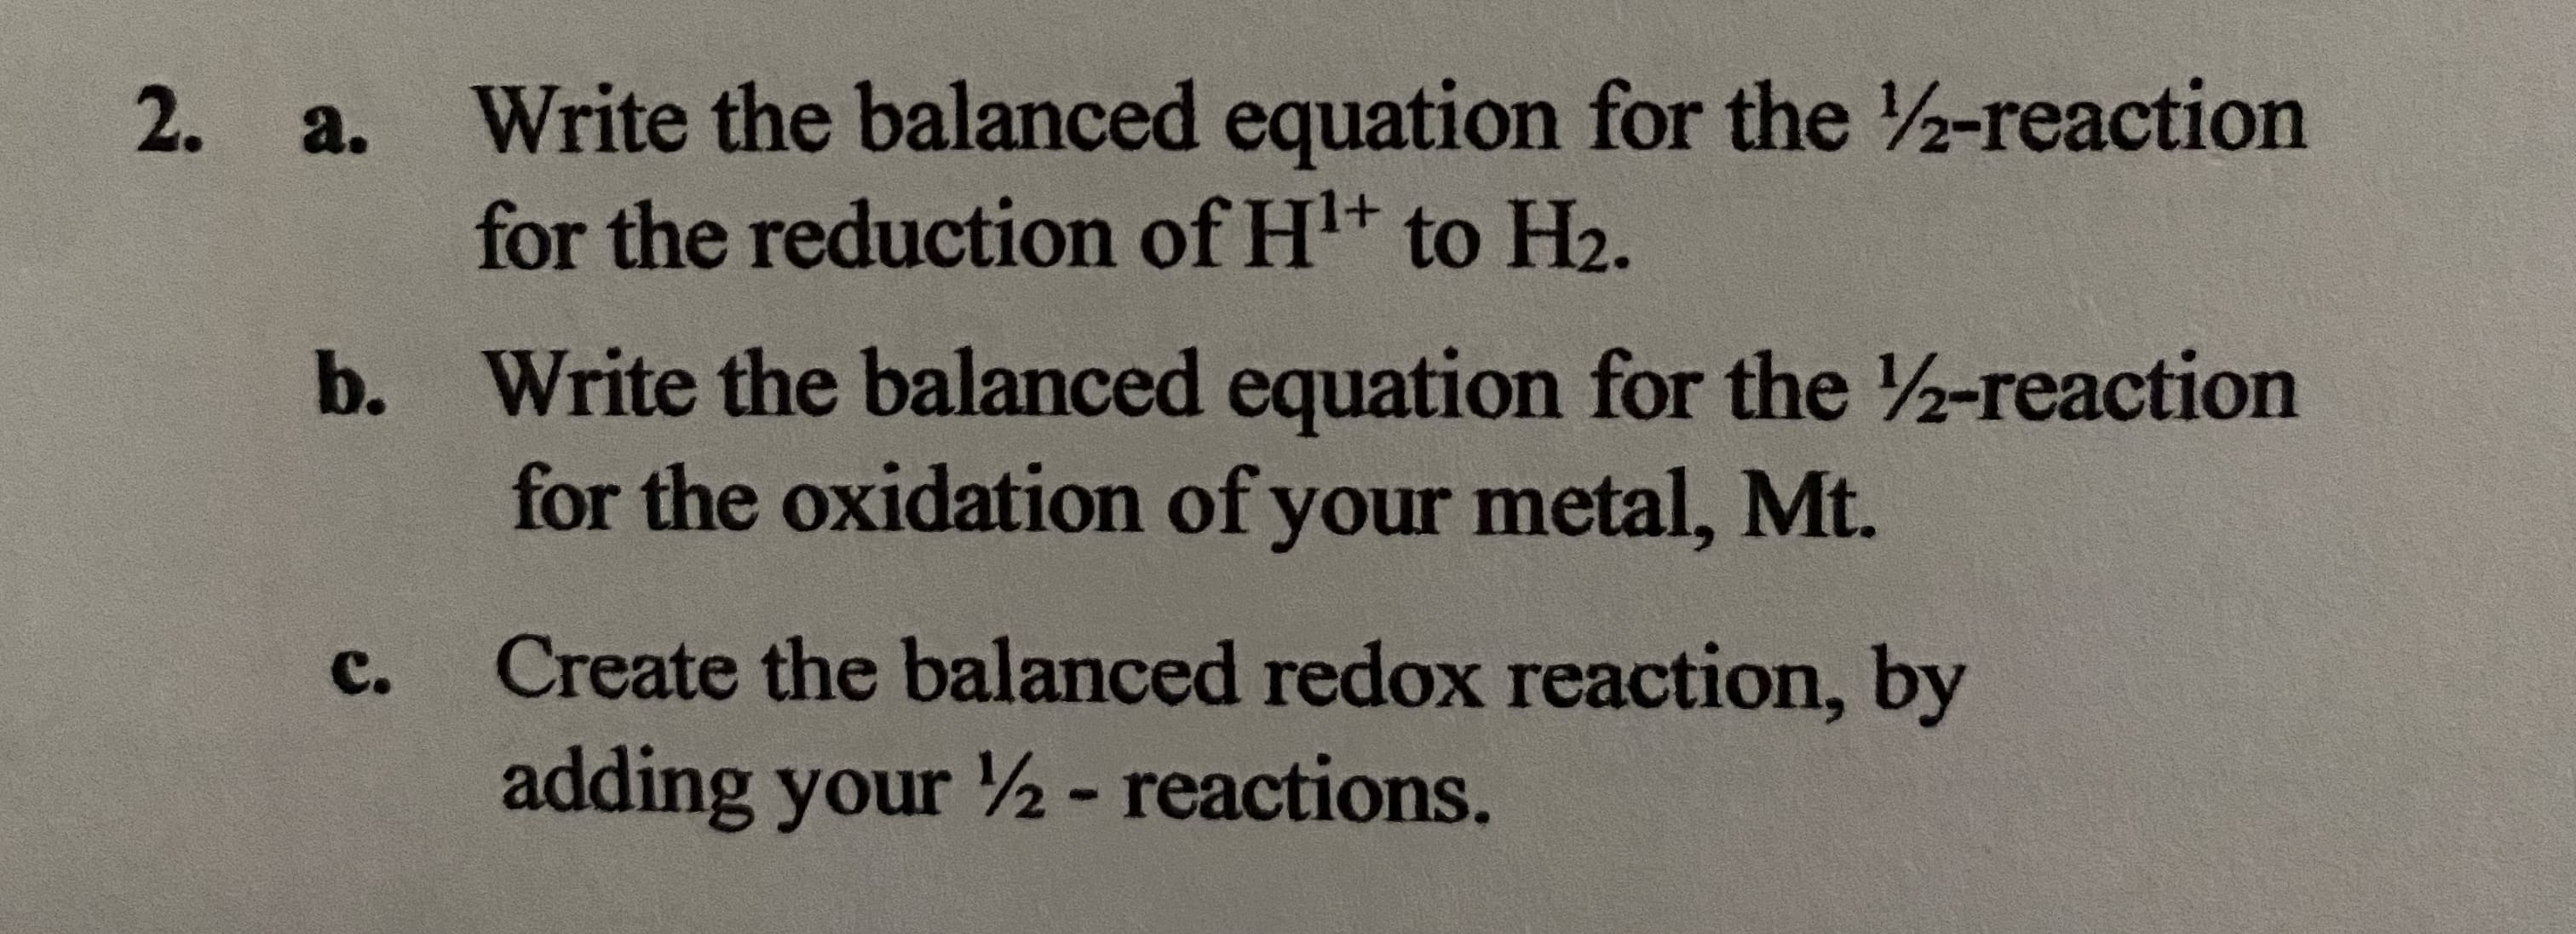 Write the balanced equation for the 2-reaction
for the reduction of H+ to H2.
a.
b. Write the balanced equation for the 2-reaction
for the oxidation of your metal, Mt.
с.
Create the balanced redox reaction, by
adding your ½- reactions.
